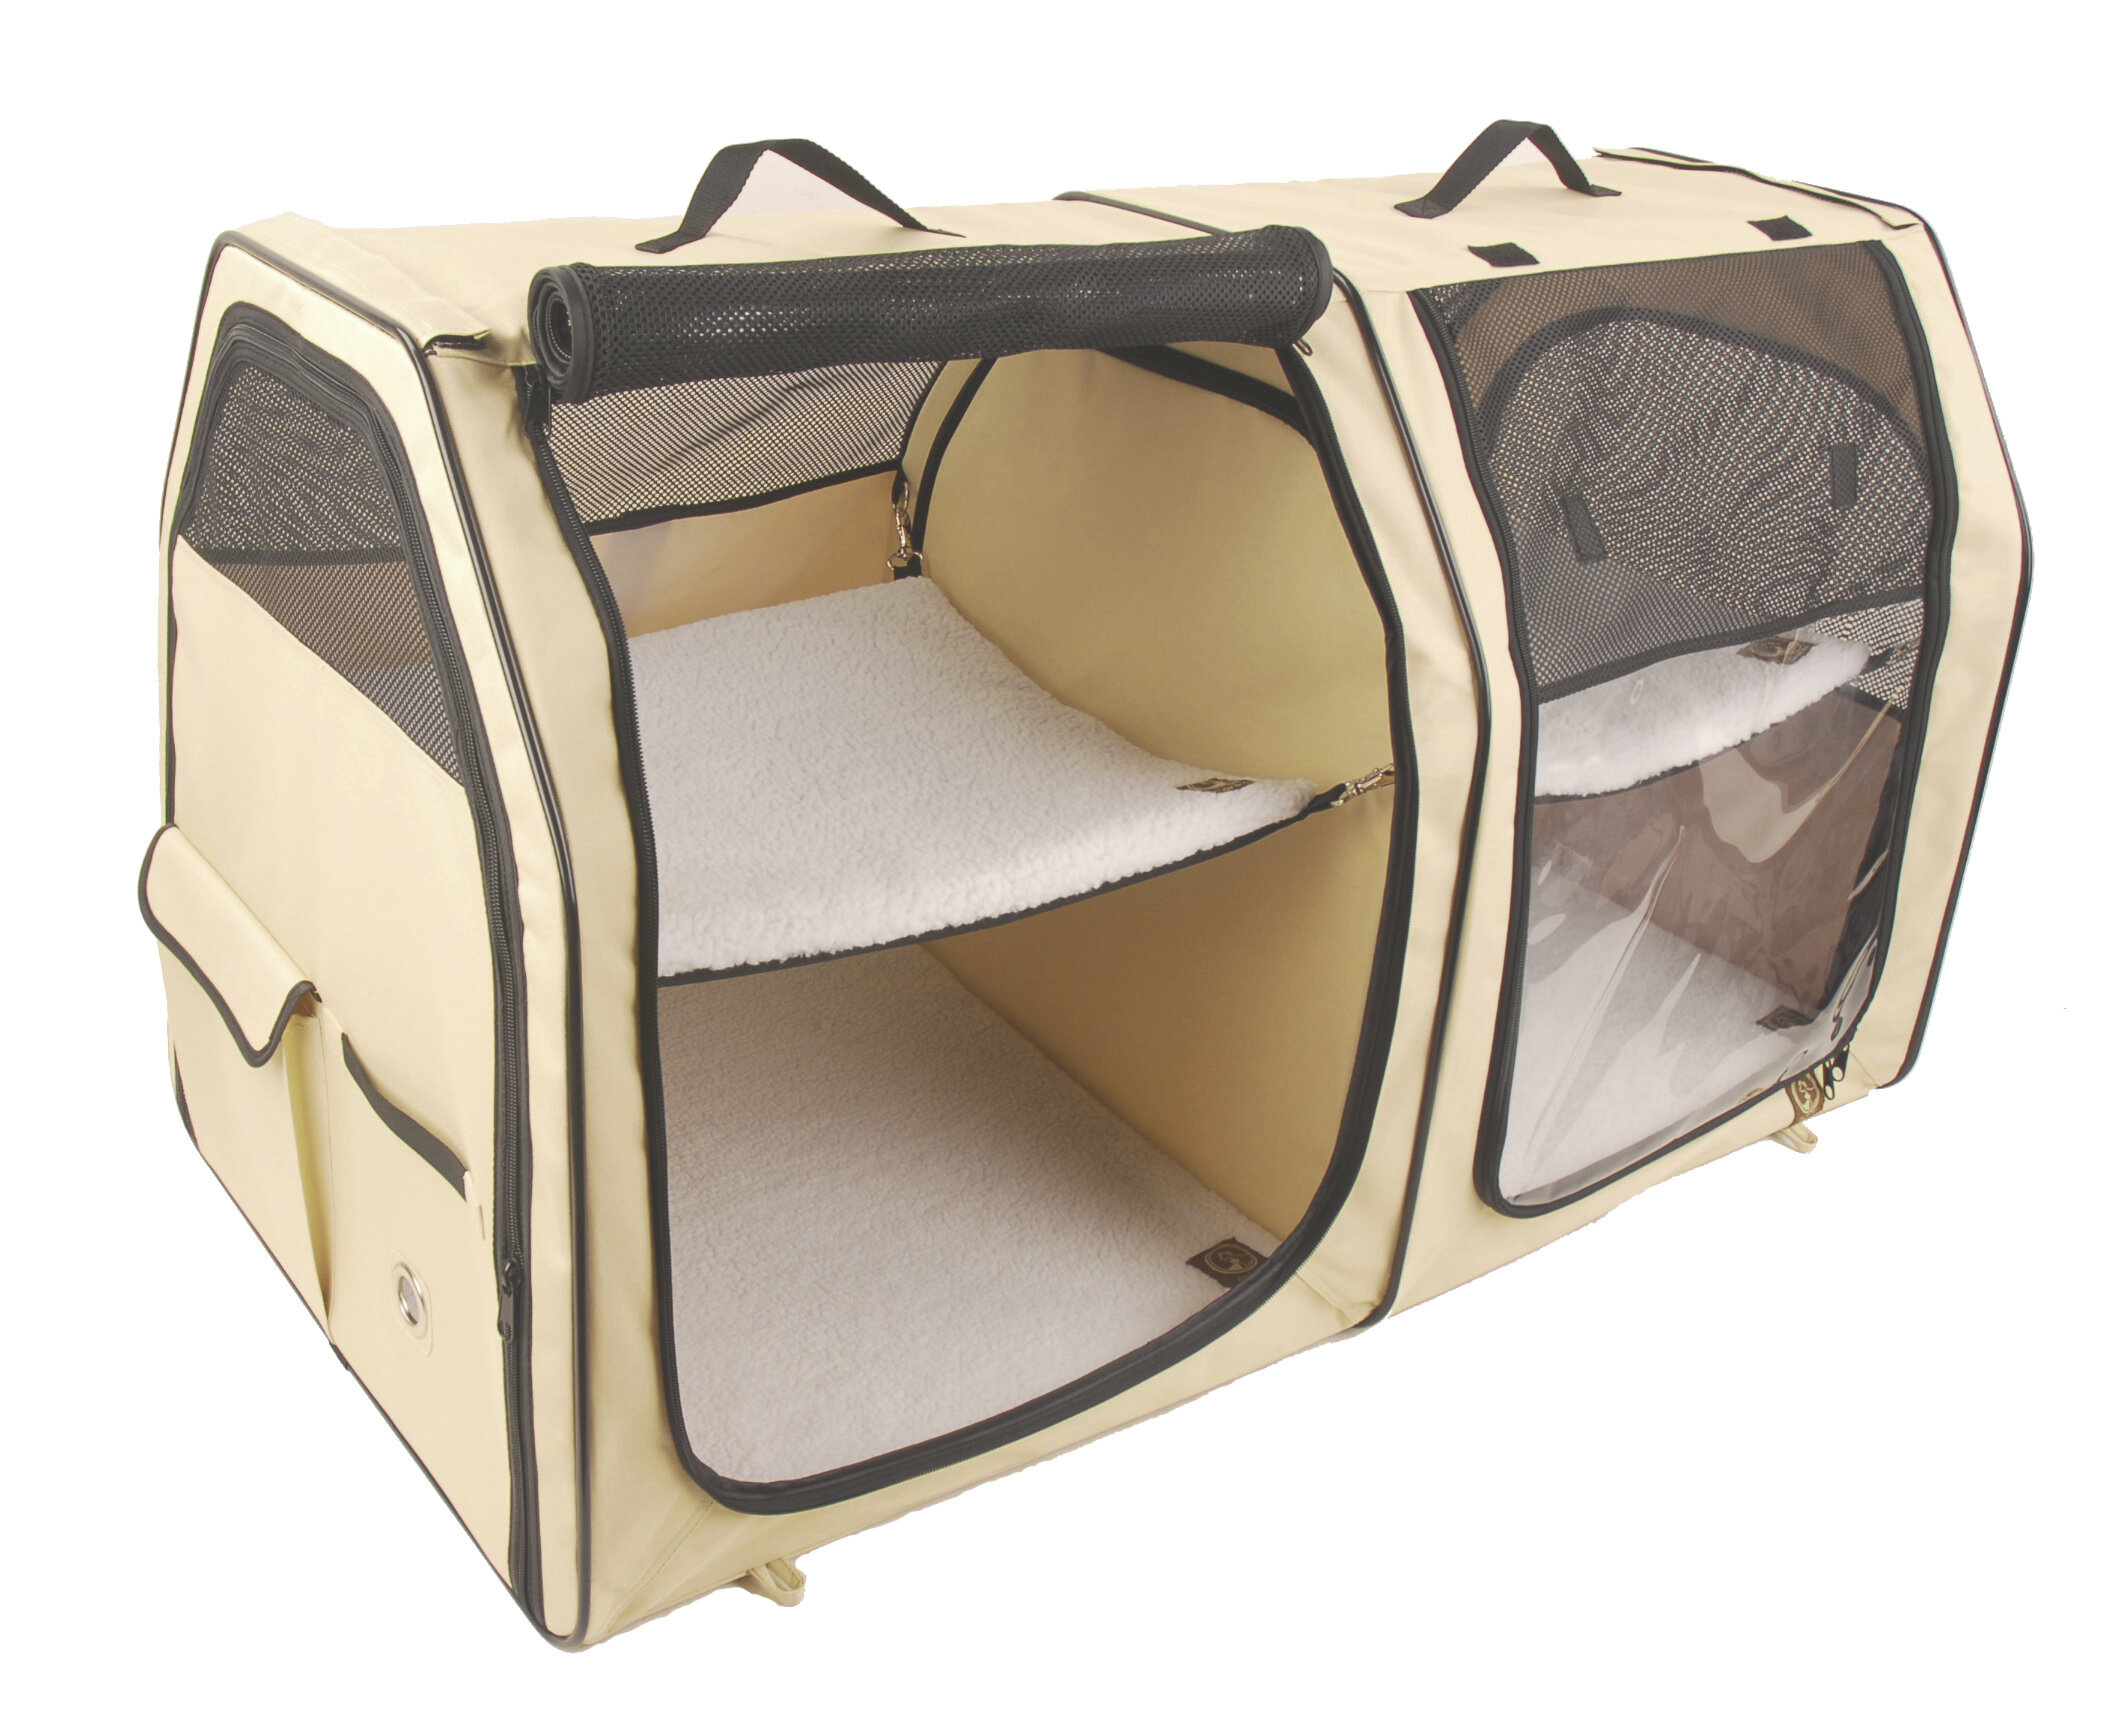 Tucker Murphy Pet Pet Carrier for Large and Medium Cats, Soft-Sided Pet Carrier for Big Medium Cats and Puppy, Dog Carriers Cat Carriers Pet Privacy